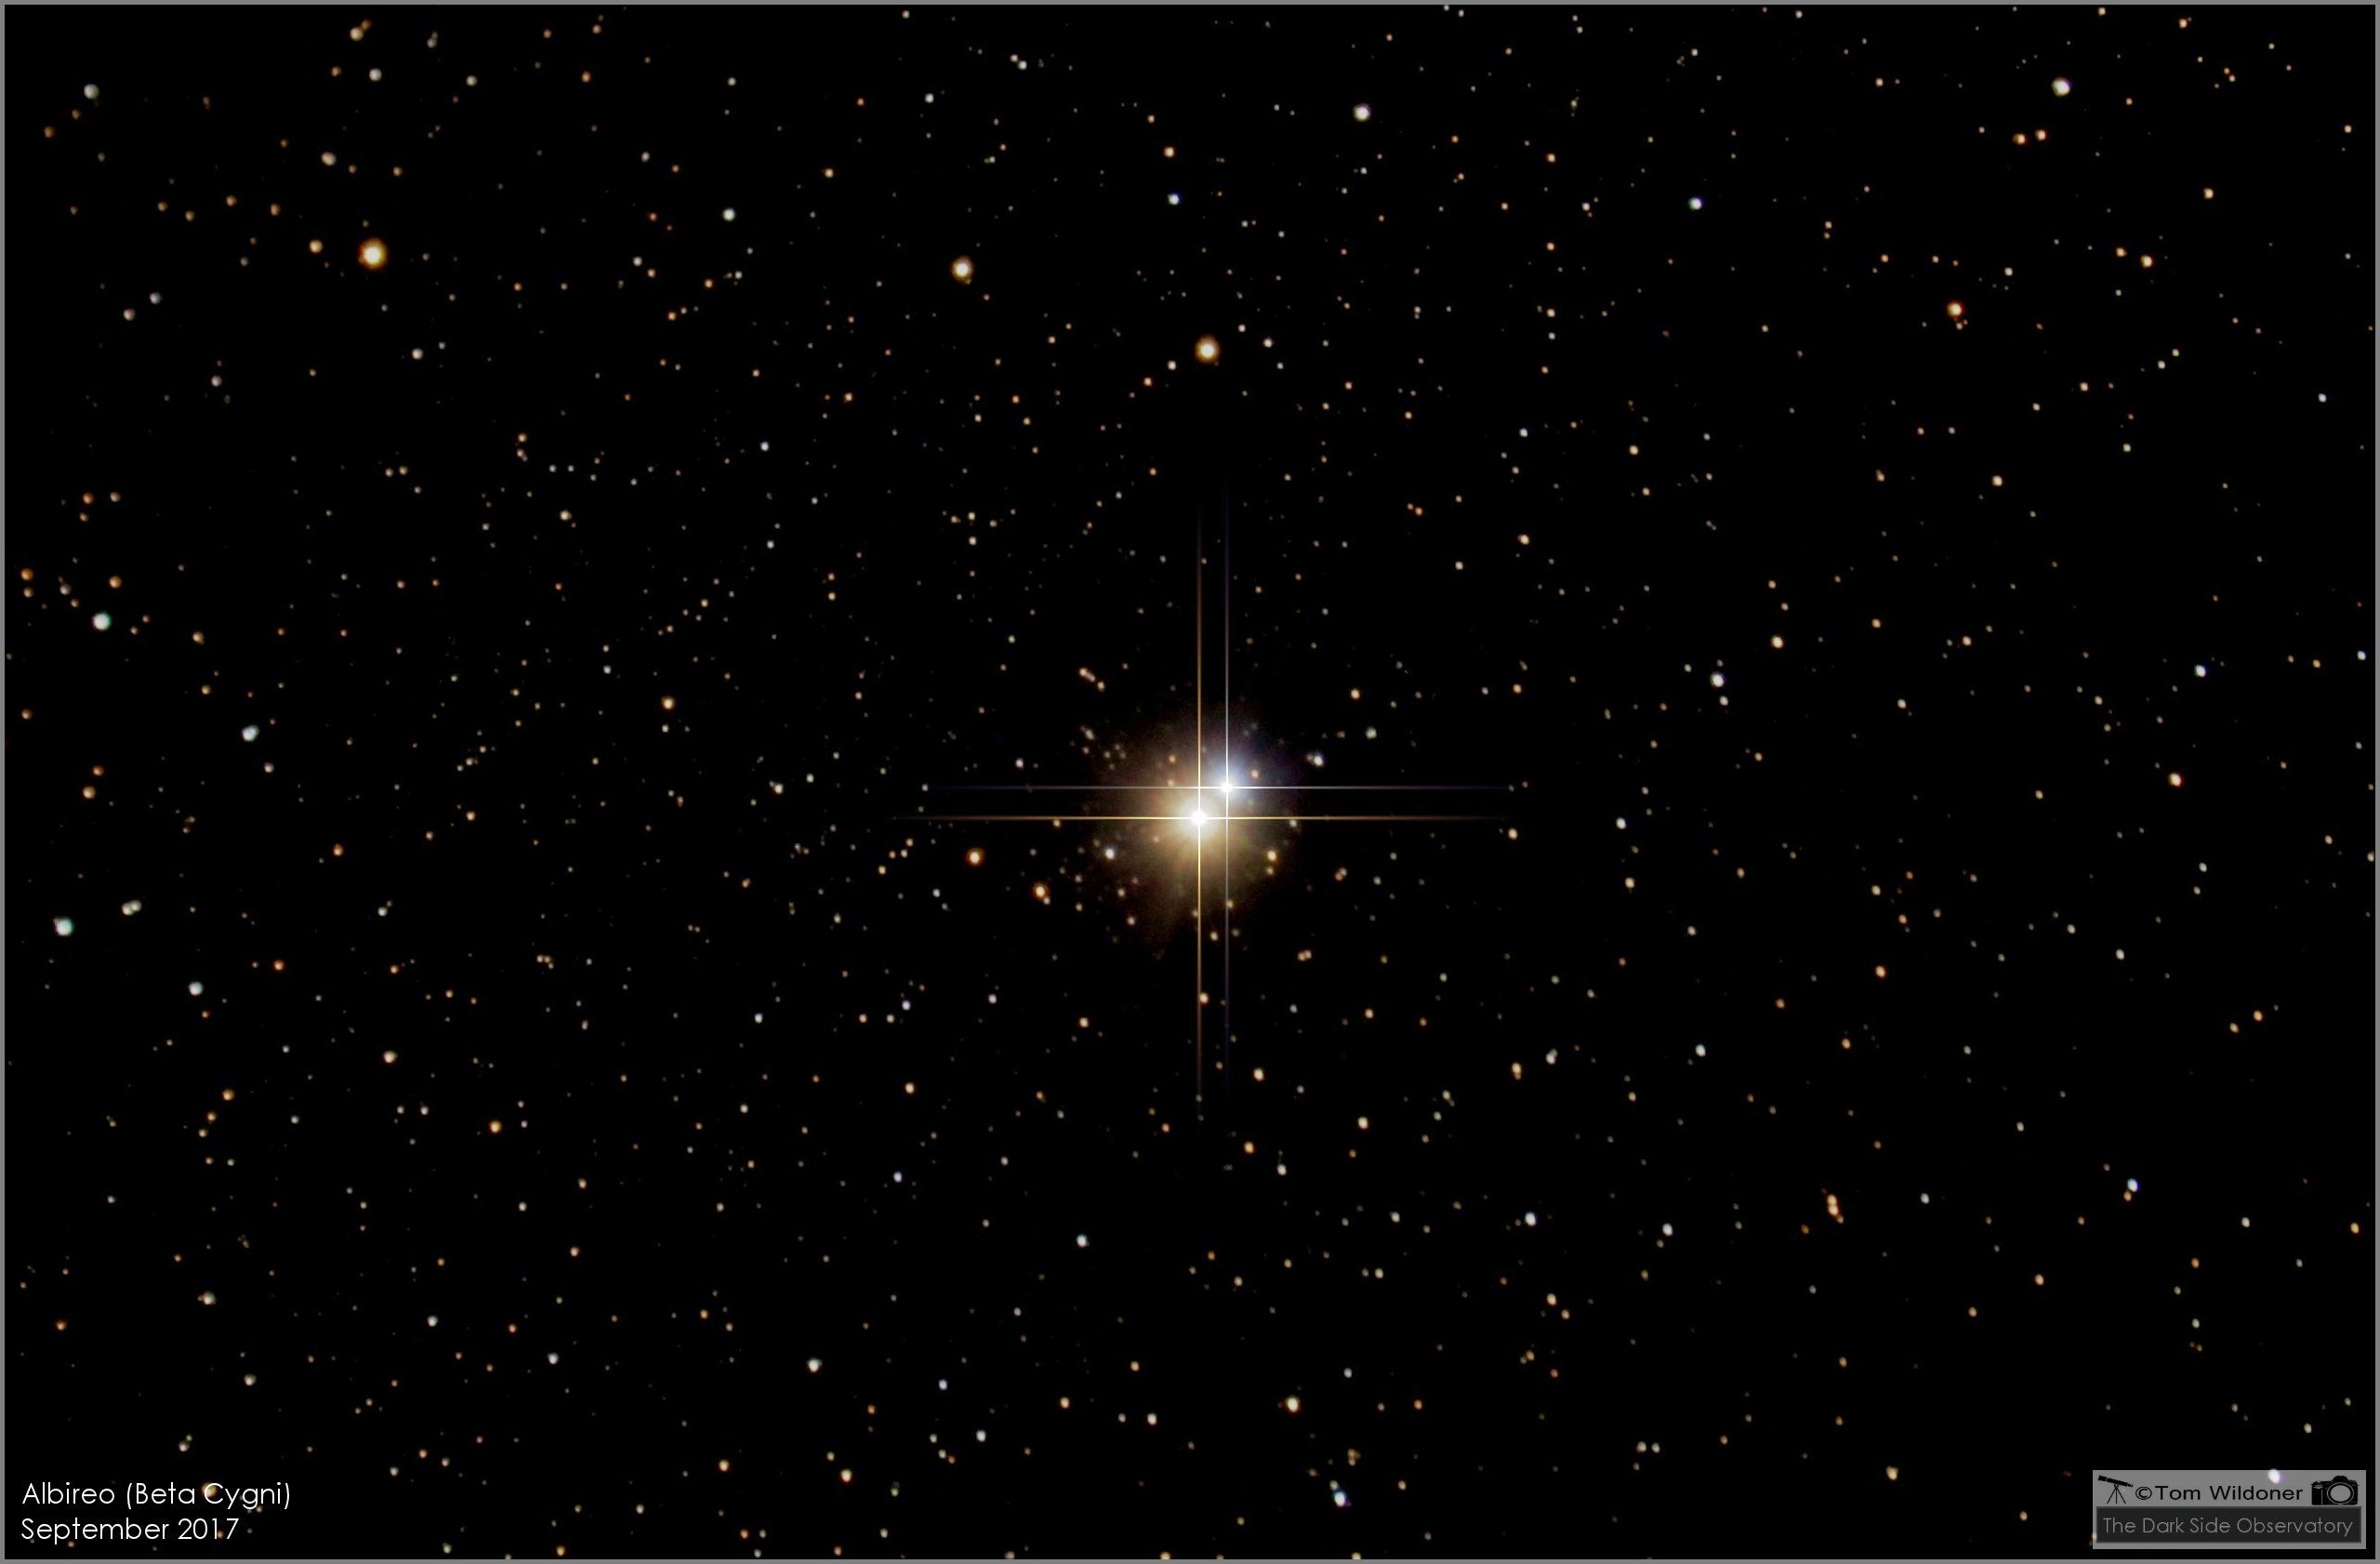 The double star (and not binary) Albireo, or Beta Cygni, the color difference obvious. Credit: Tom Wildoner